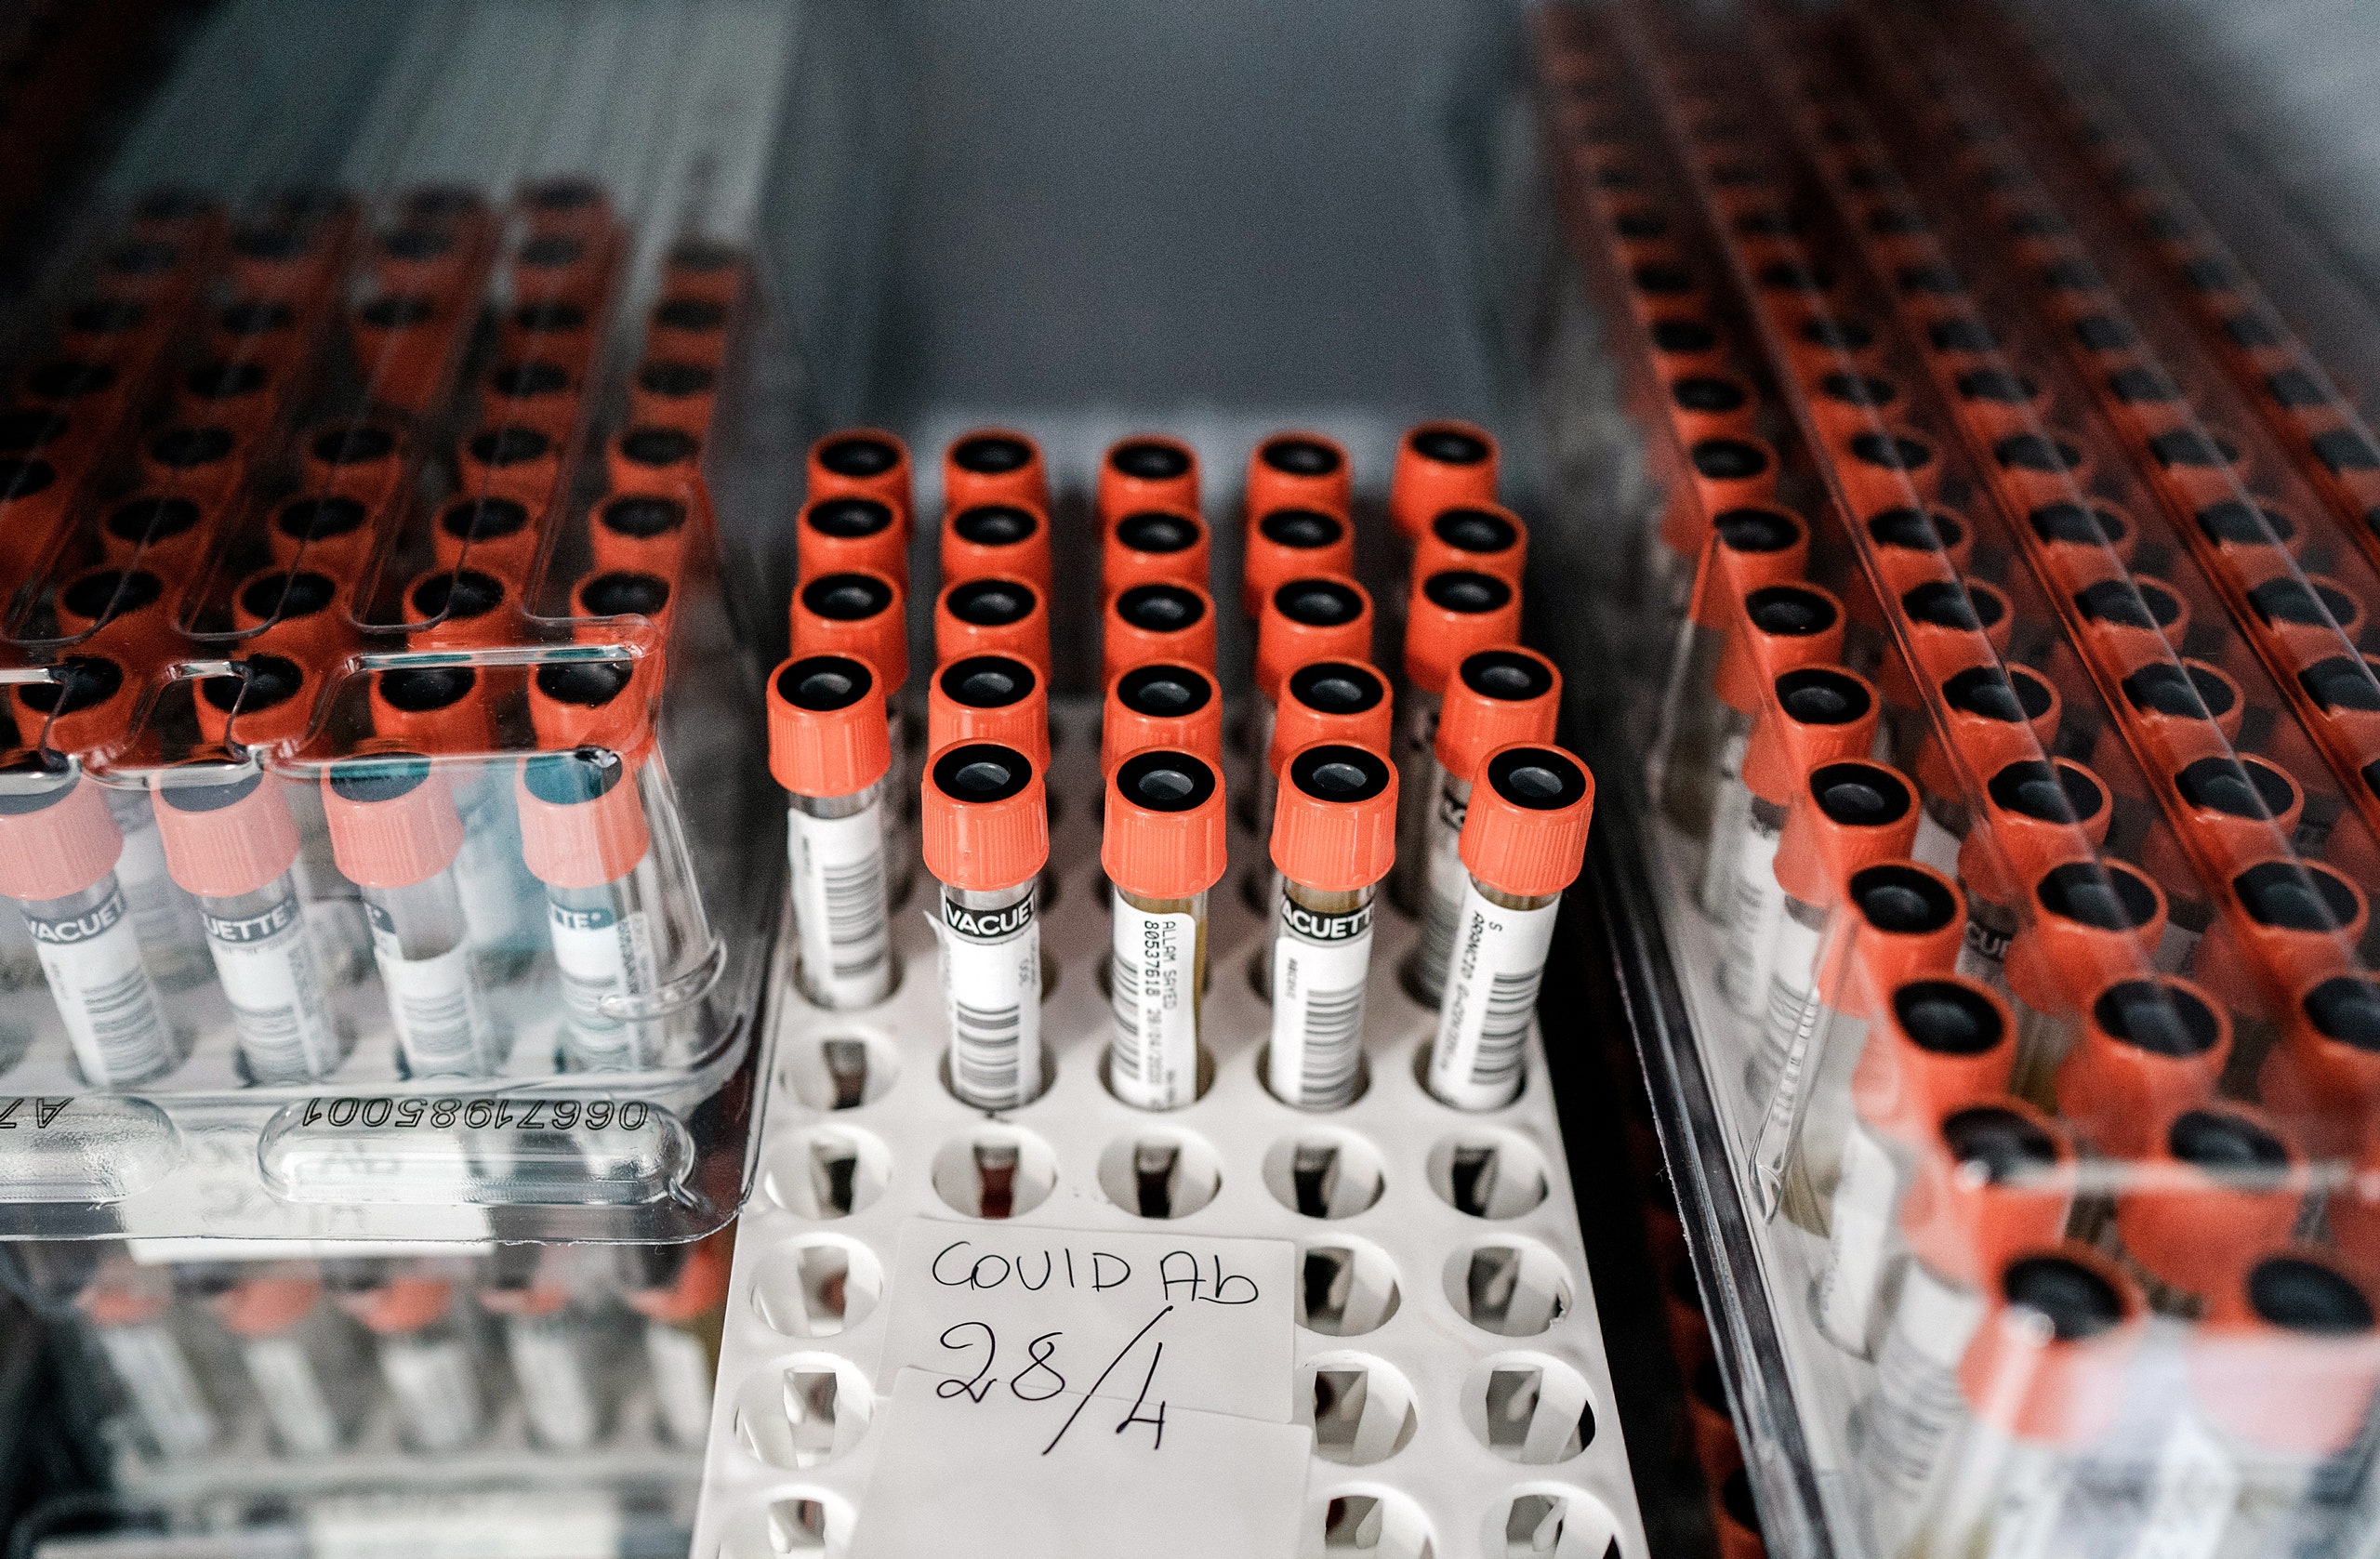 How A Potential Treatment For The Coronavirus Turned Up In A Scientist's Freezer